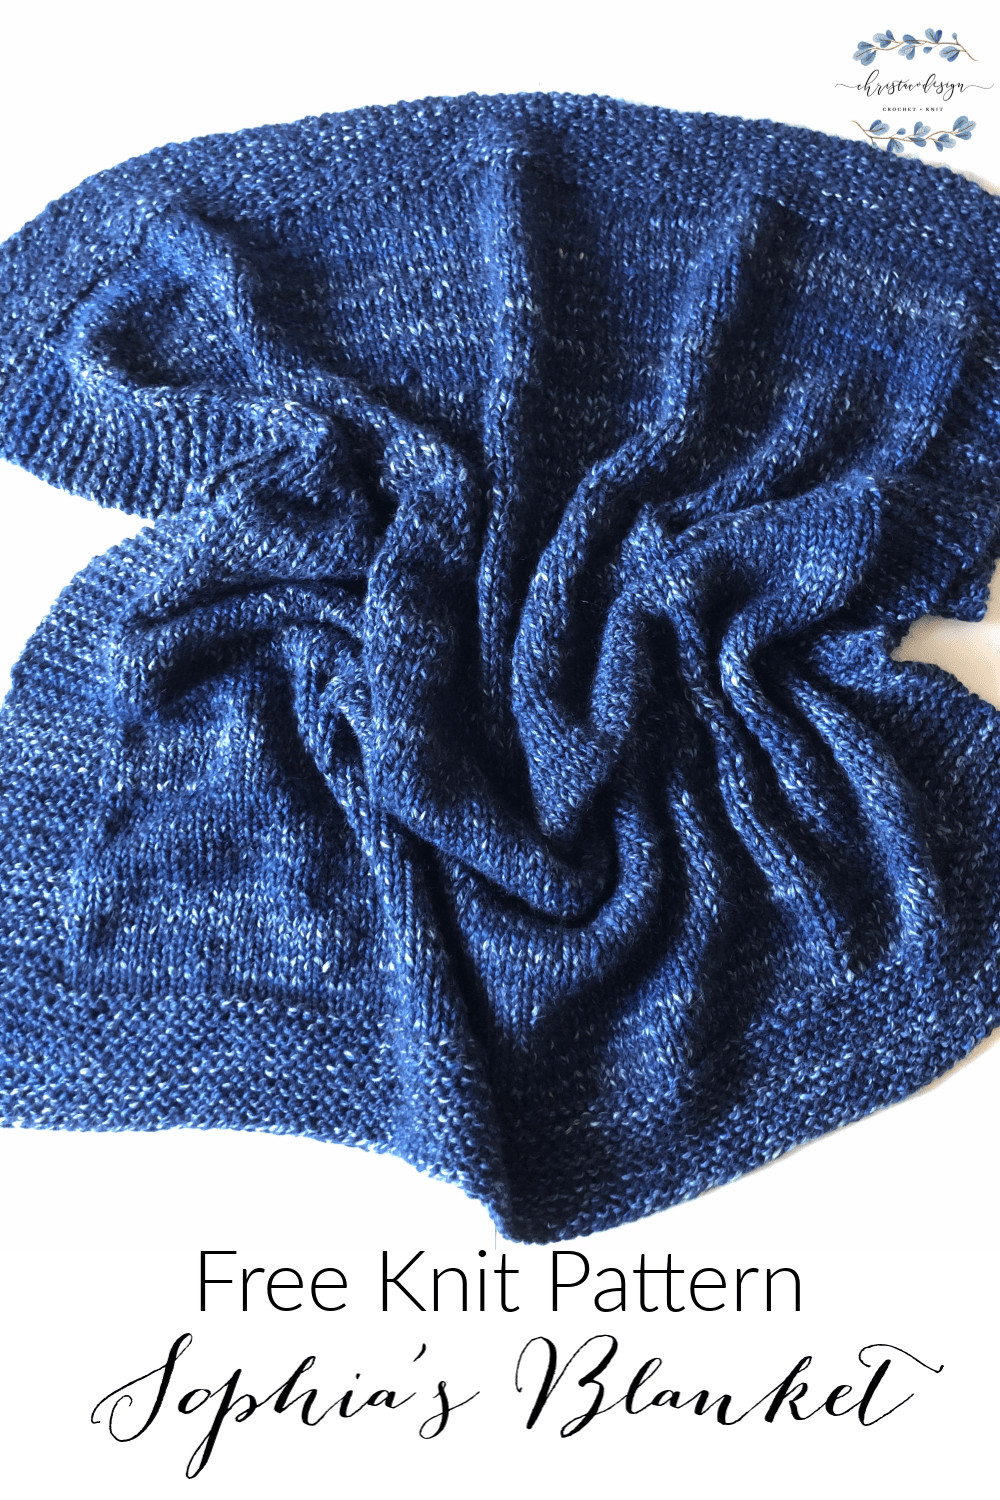 Pin image of navy blanket with text free knit blanket pattern.